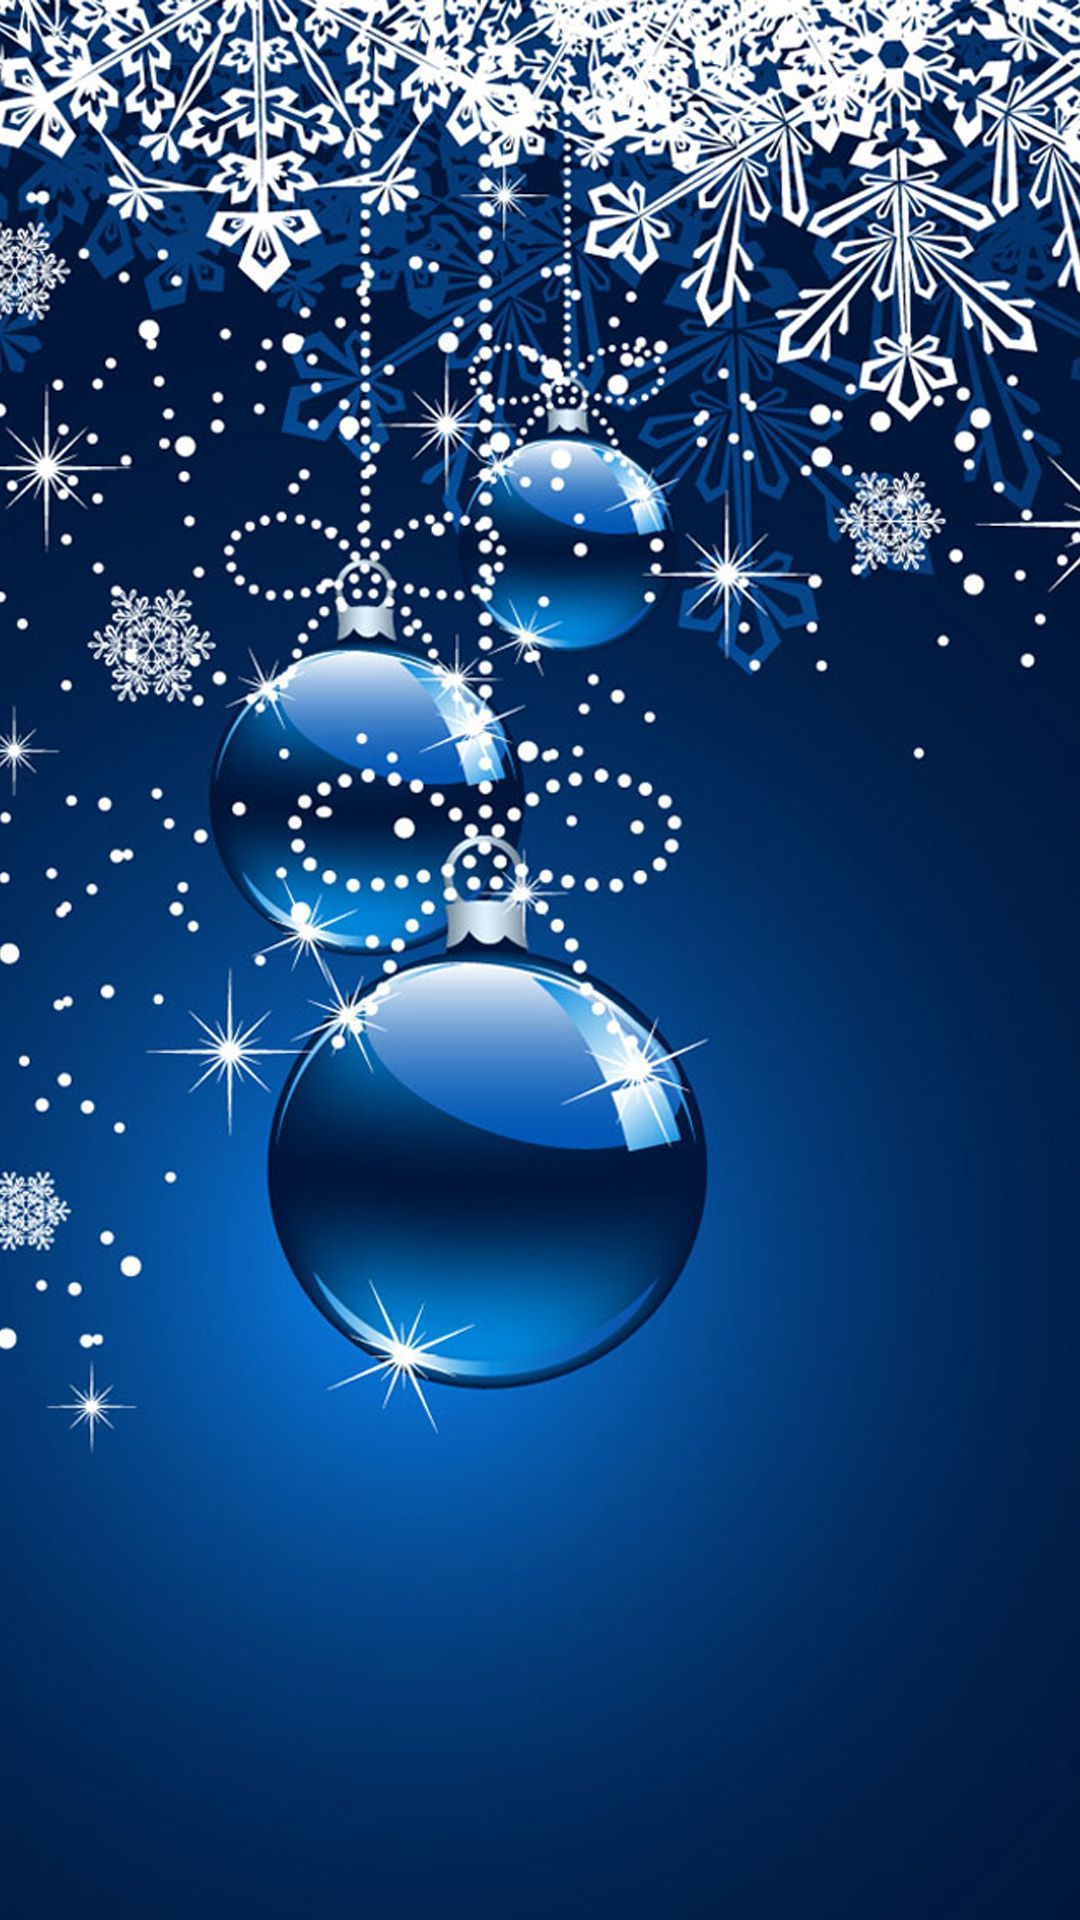 168christmas Ornaments Blue Background Galaxy S5 Wallpaper 080×920 Pixel. Christmas Phone Wallpaper, Wallpaper Iphone Christmas, Xmas Wallpaper